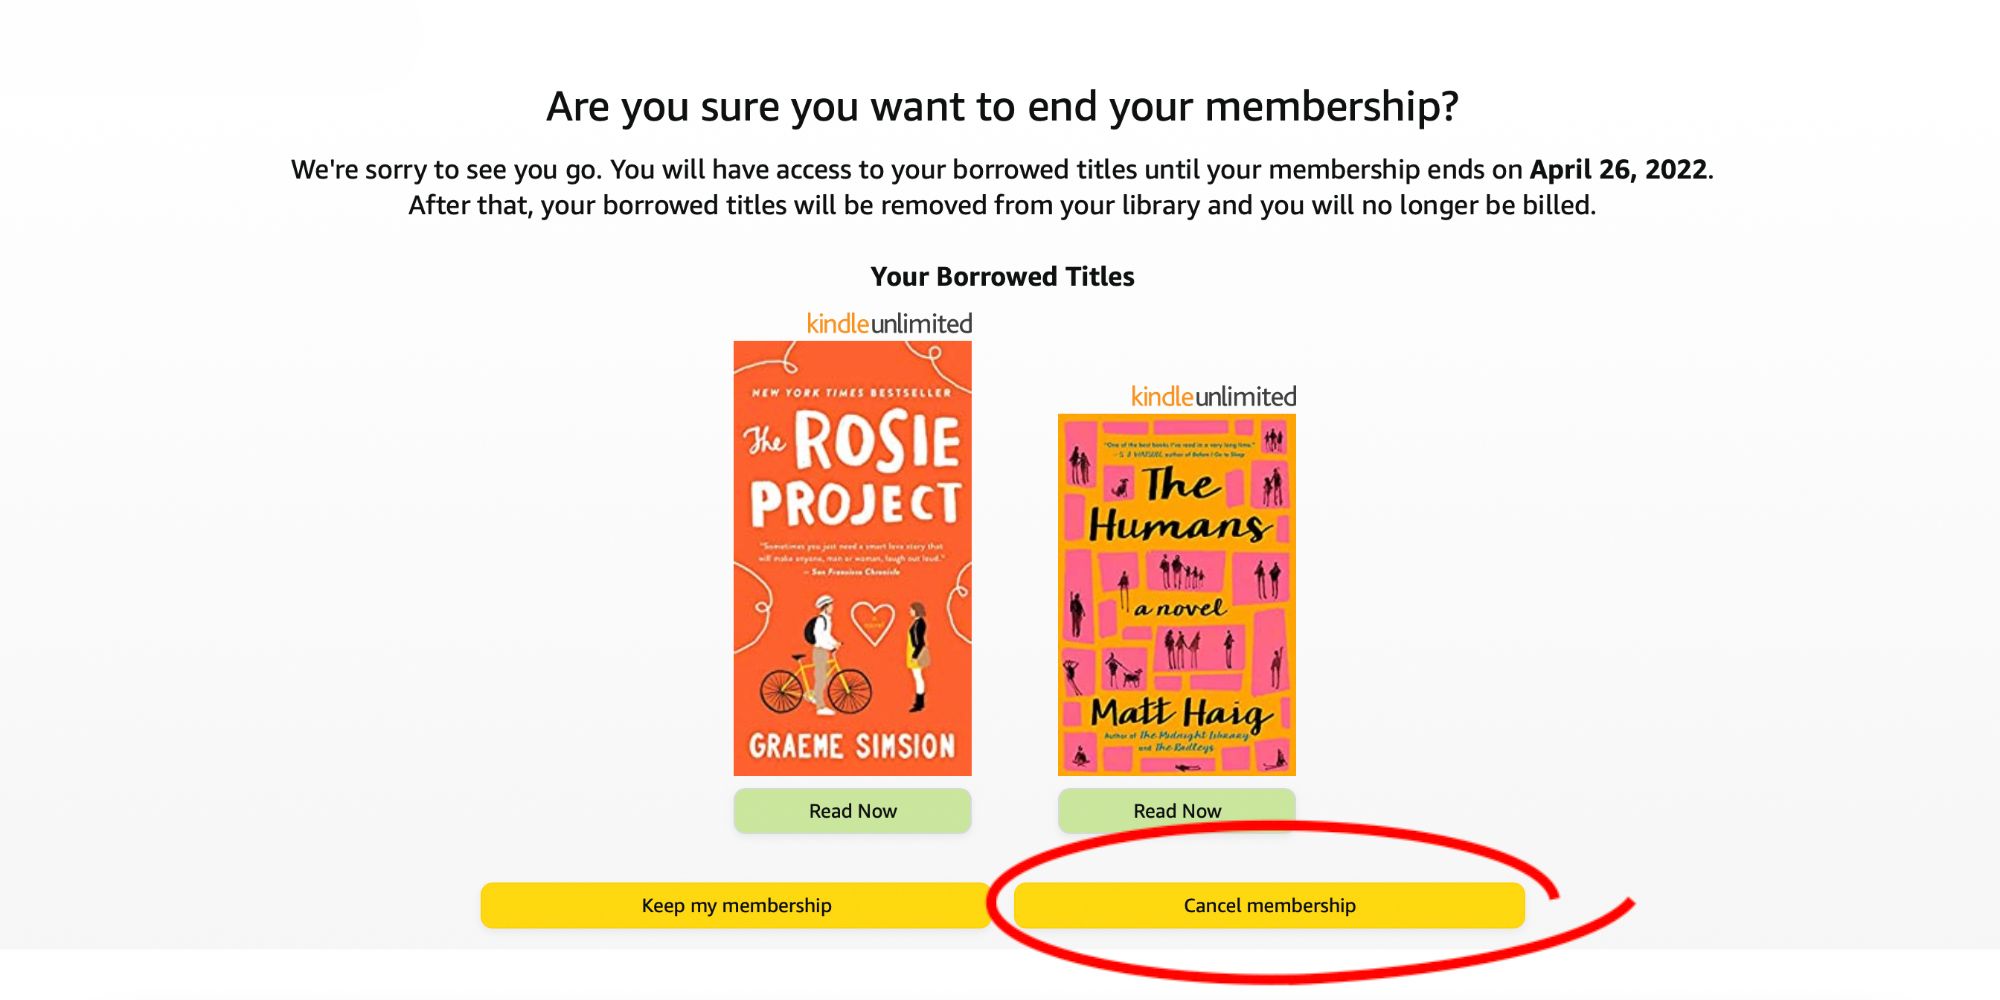 Cancel Kindle Unlimited: HOW TO CANCEL KINDLE UNLIMITED MEMBERSHIP STEP BY  STEP IN 27 SECOND